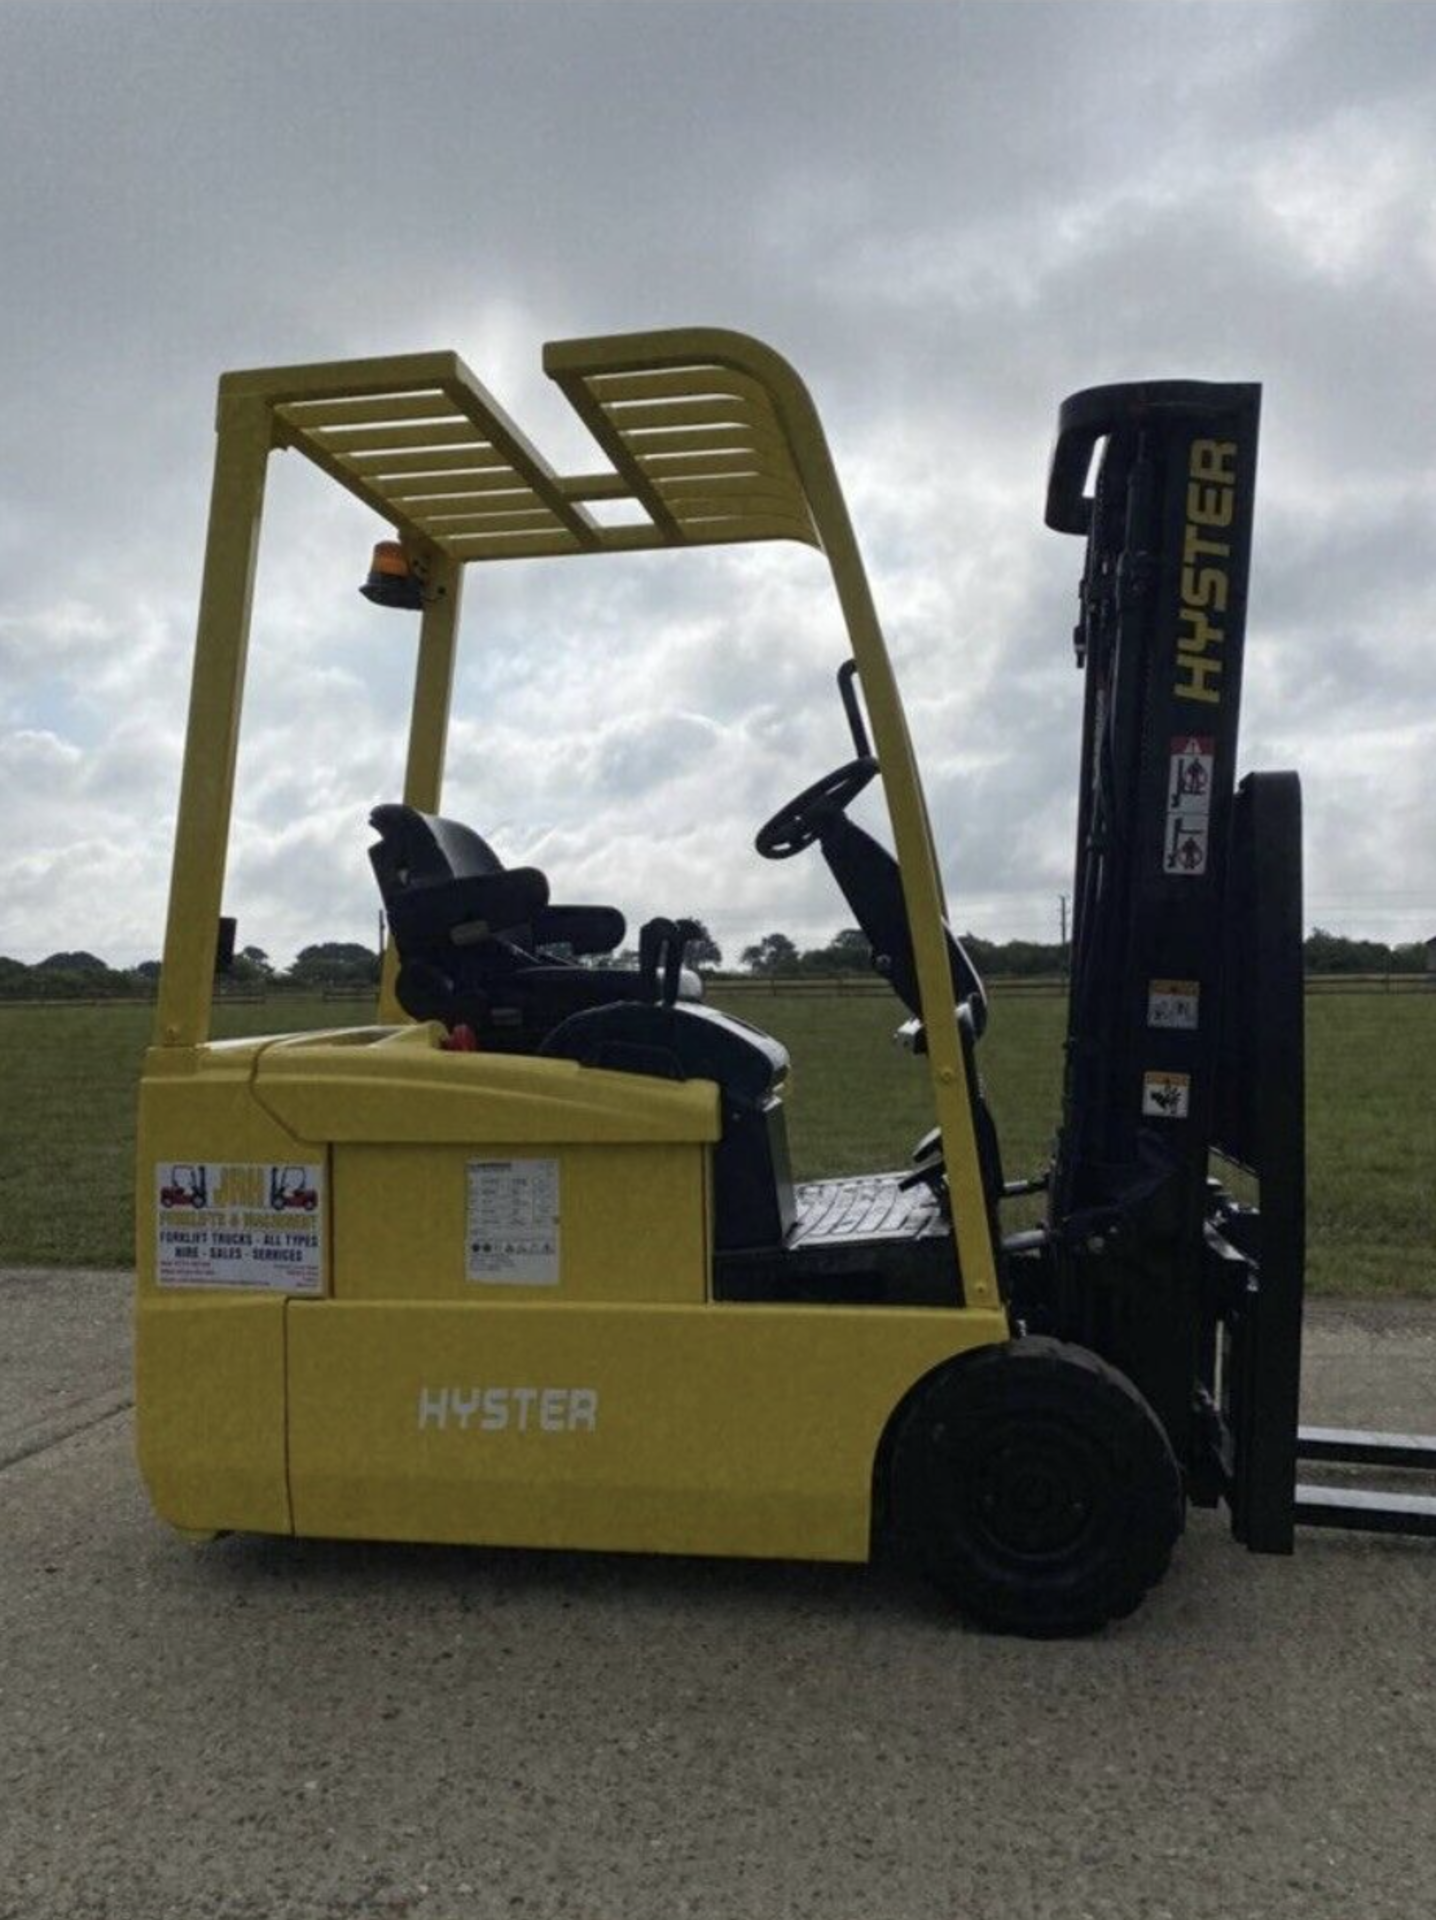 HYSTER 1.6 Electric Forklift Truck - Container Spec - Image 4 of 4